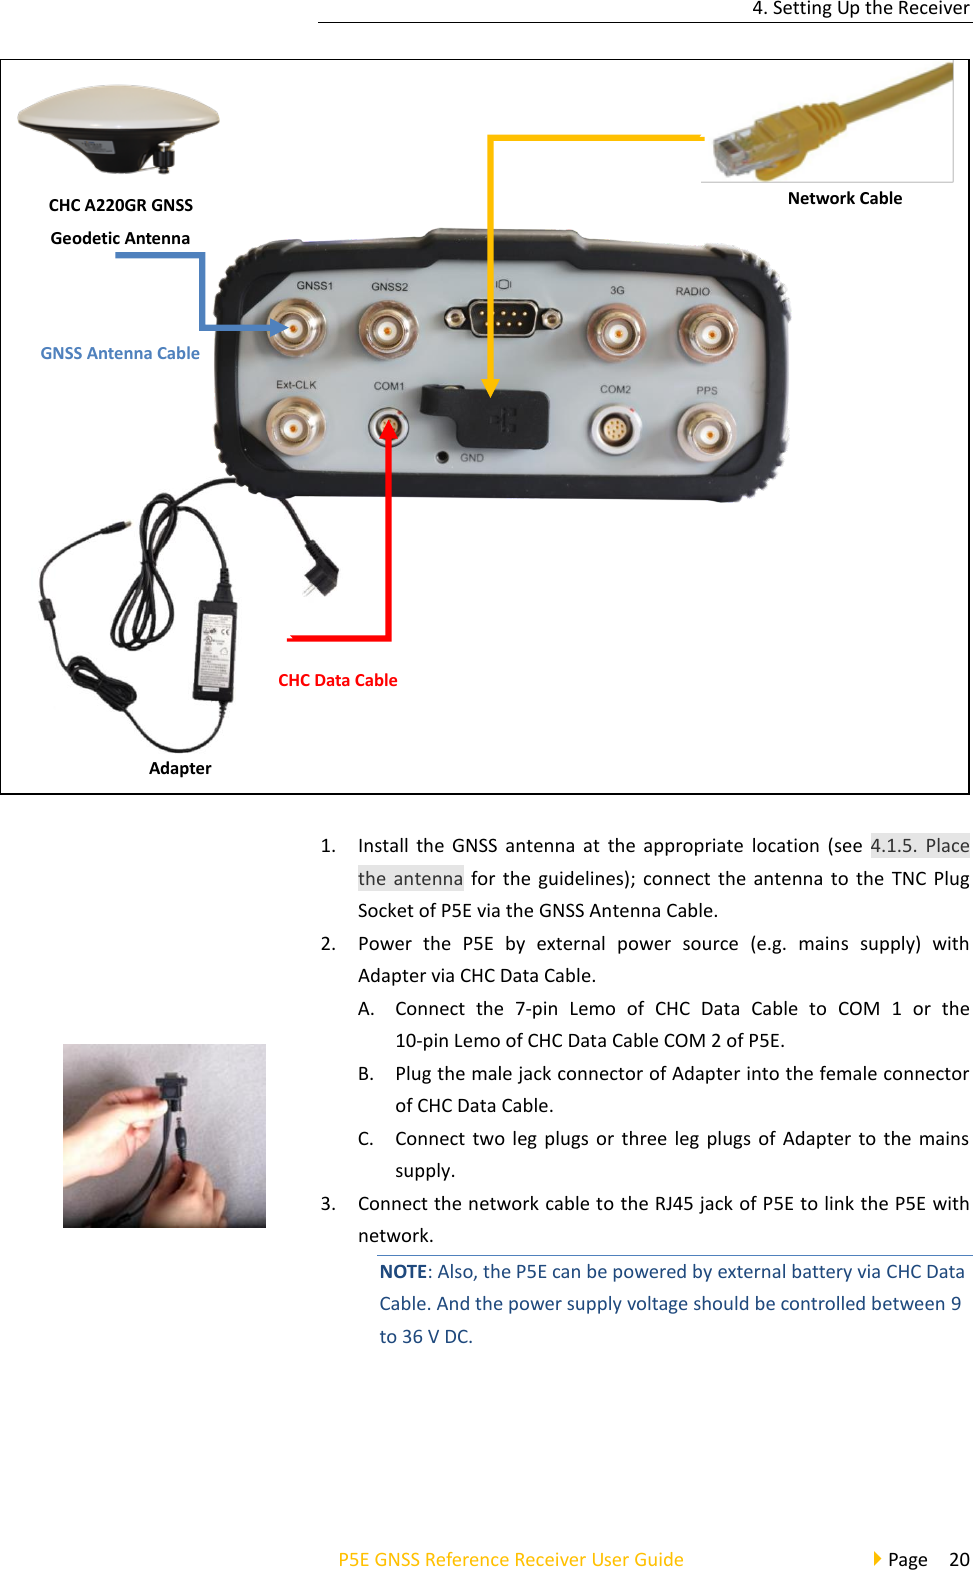 4. Setting Up the Receiver P5E GNSS Reference Receiver User Guide                                     Page  20  1. Install  the  GNSS antenna  at  the appropriate  location  (see  4.1.5.  Place the antenna for the  guidelines); connect the  antenna to the  TNC Plug Socket of P5E via the GNSS Antenna Cable. 2. Power  the  P5E  by  external  power  source  (e.g.  mains  supply)  with Adapter via CHC Data Cable.   A. Connect  the  7-pin  Lemo  of  CHC  Data  Cable  to  COM  1  or  the   10-pin Lemo of CHC Data Cable COM 2 of P5E.   B. Plug the male jack connector of Adapter into the female connector of CHC Data Cable. C. Connect two  leg  plugs or  three leg  plugs of Adapter  to  the mains supply. 3. Connect the network cable to the RJ45 jack of P5E to link the P5E with network.   NOTE: Also, the P5E can be powered by external battery via CHC Data Cable. And the power supply voltage should be controlled between 9 to 36 V DC.   GNSS Antenna Cable Network Cable CHC A220GR GNSS Geodetic Antenna Adapter CHC Data Cable 